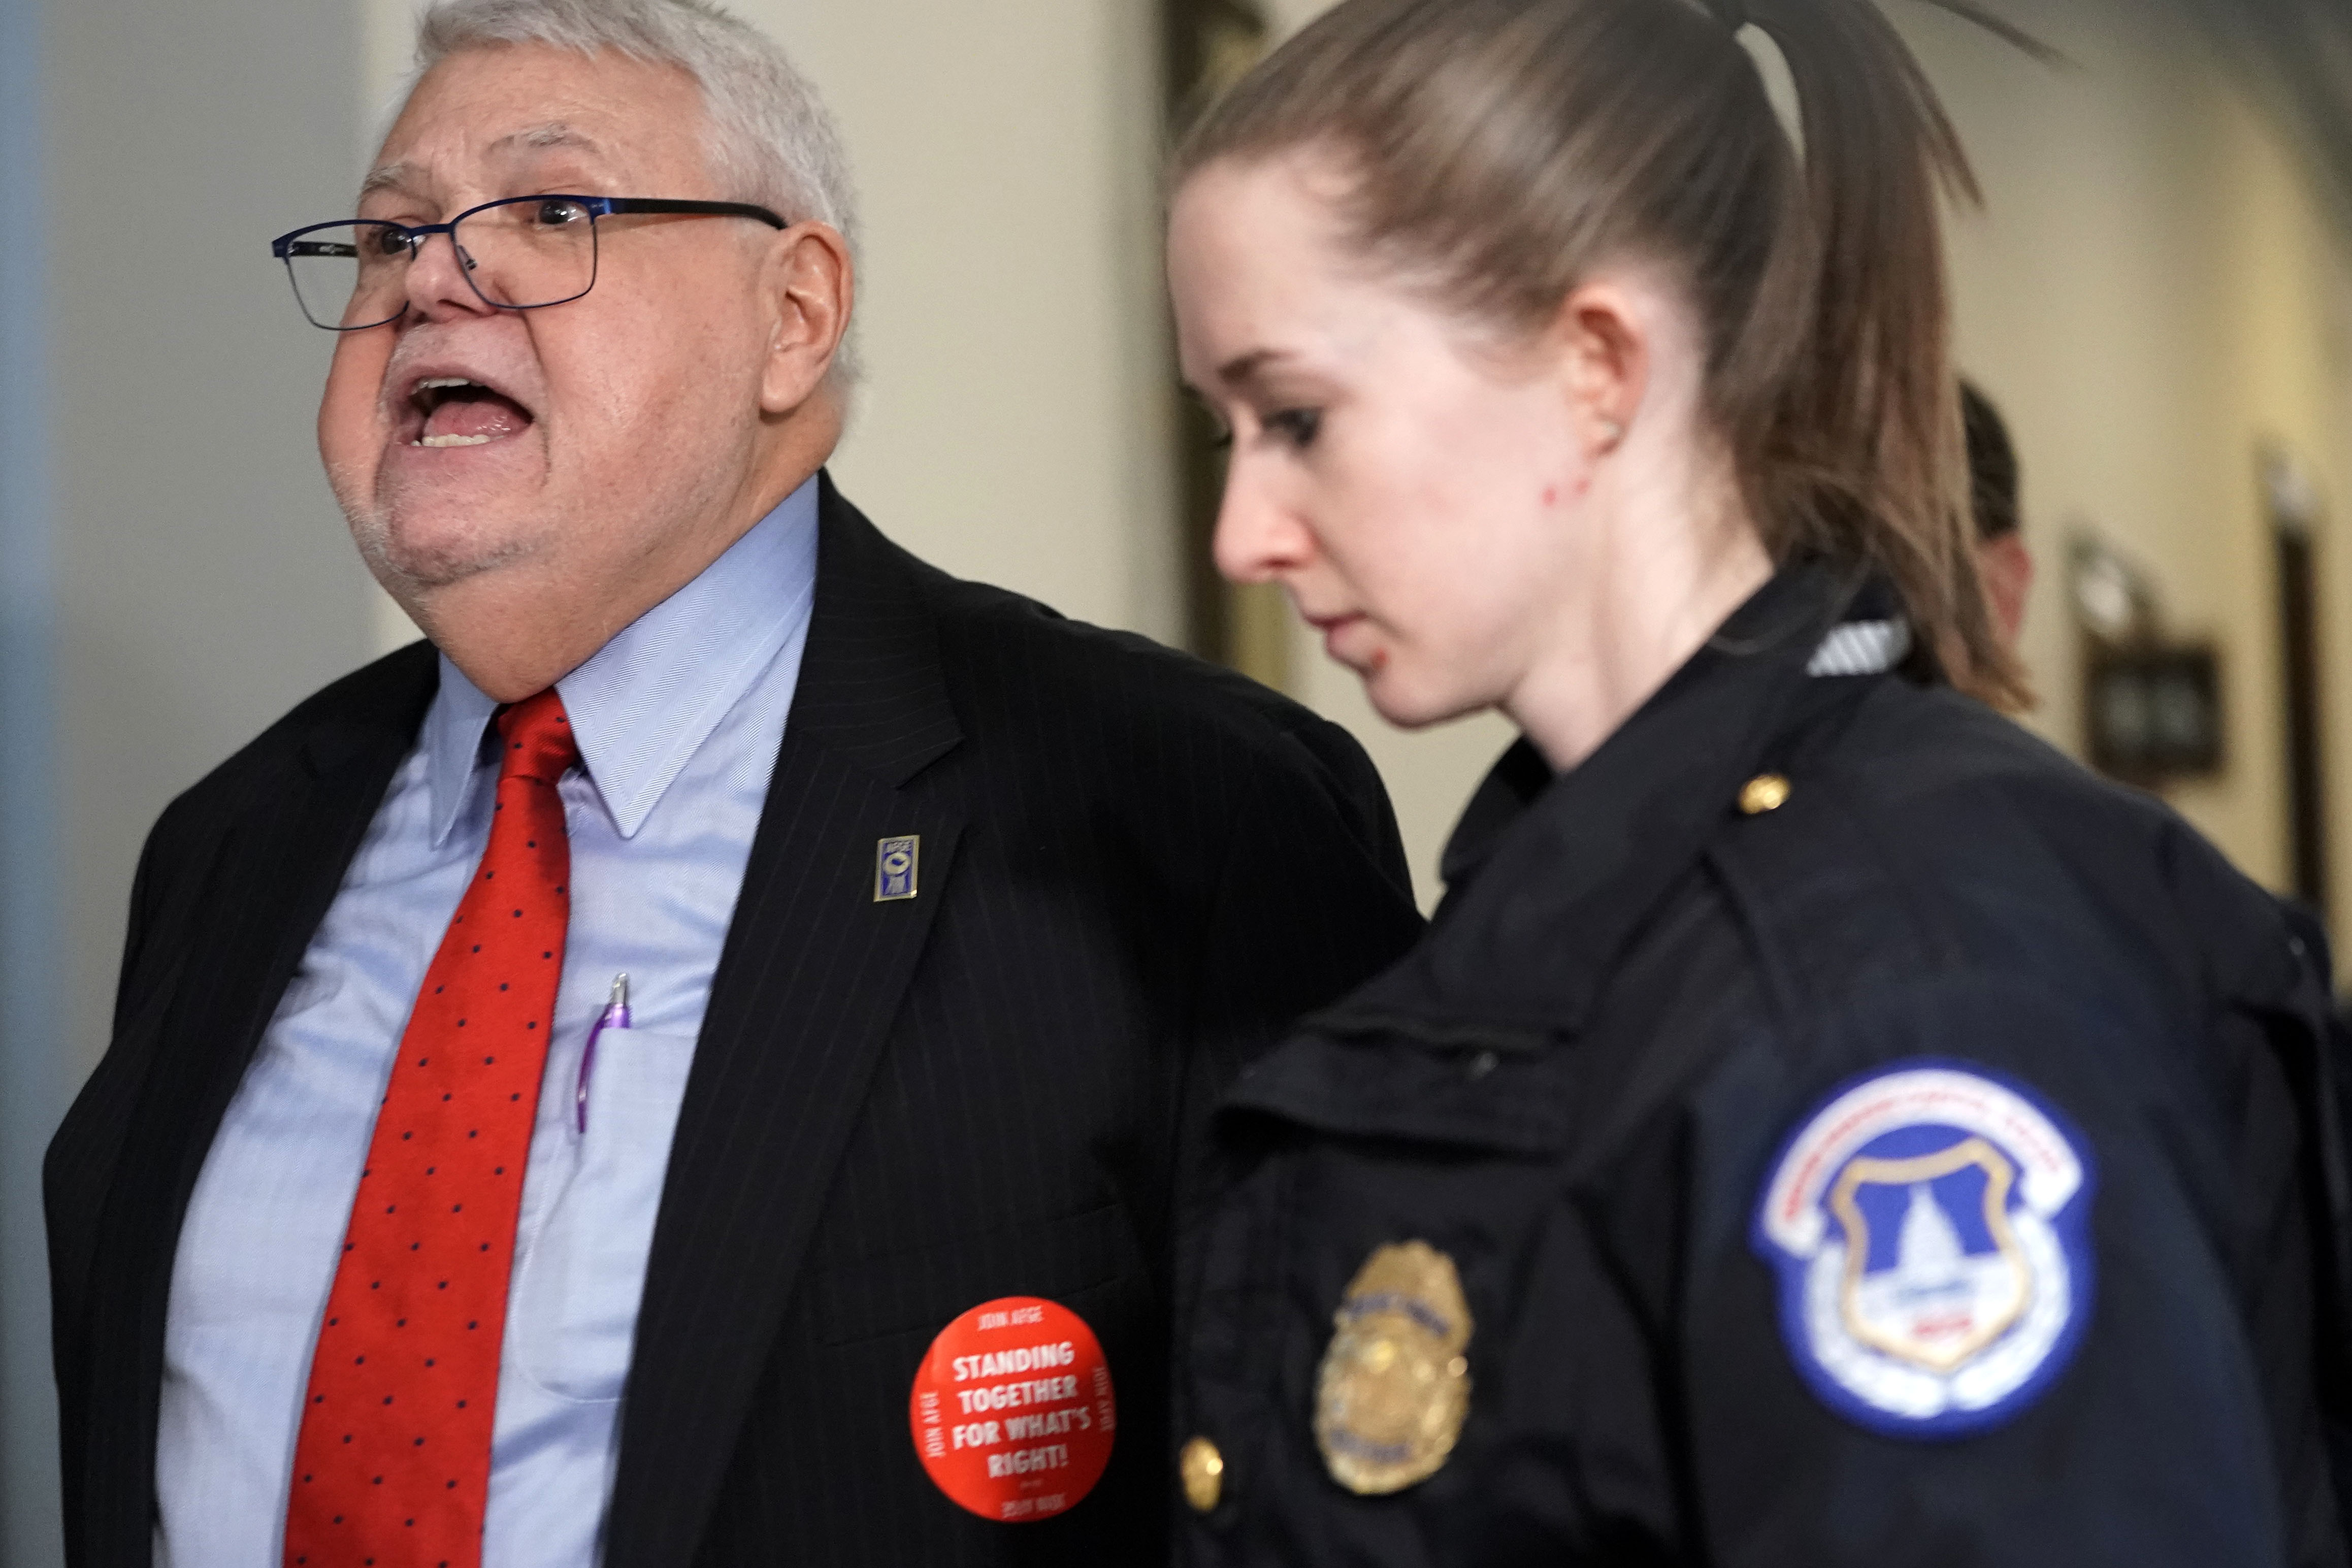 J. David Cox, president of the American Federation of Government Employees (AFGE), is led away by a member of U.S. Capitol Police while protesting the government shutdown on January 23, 2019. (Alex Wong/Getty Images)